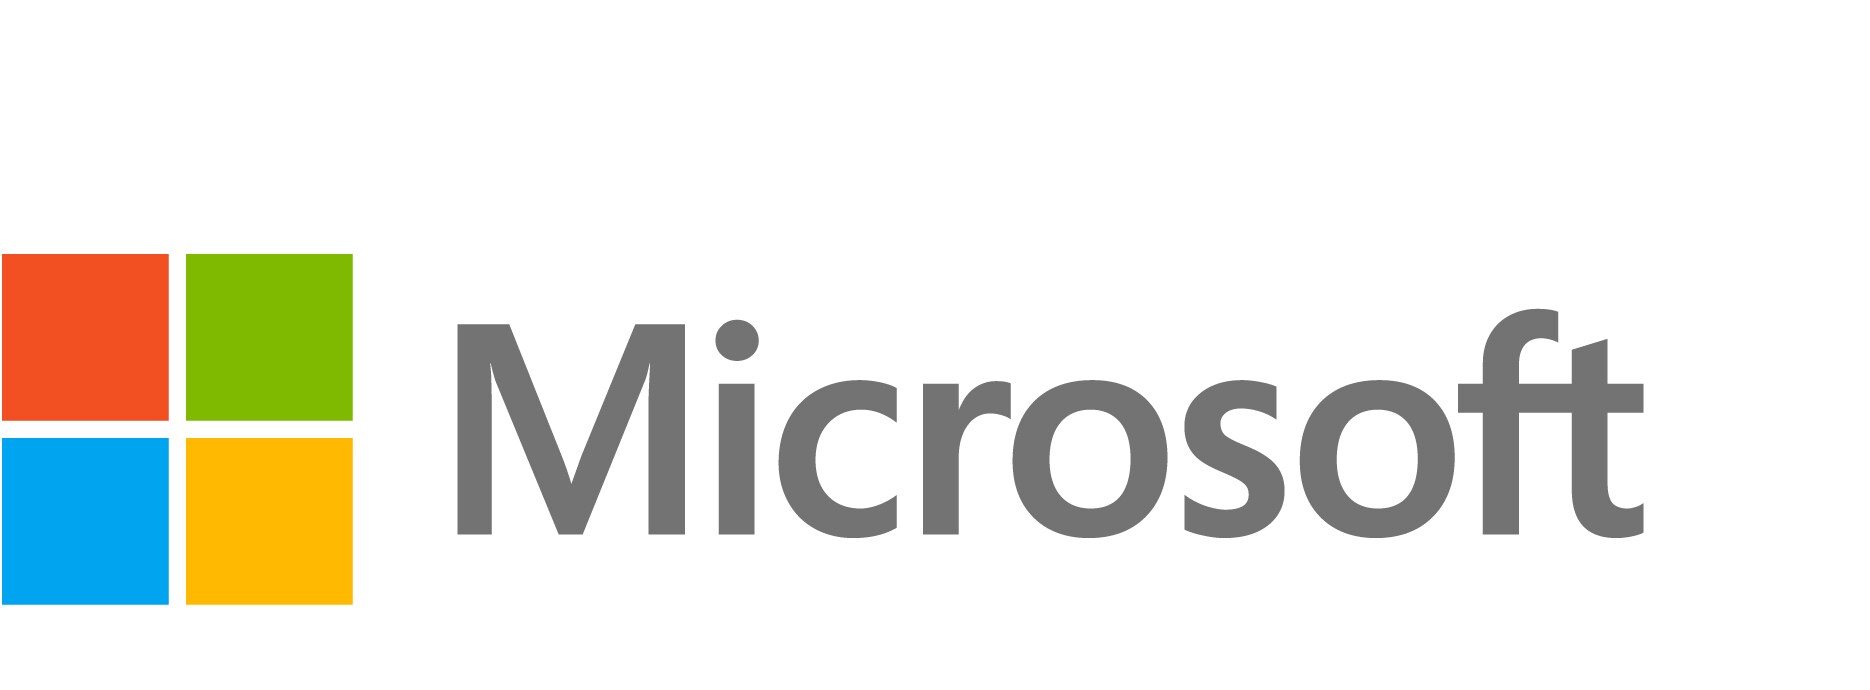 Microsoft Extended Hardware Service Plan Plus - extended service agreement